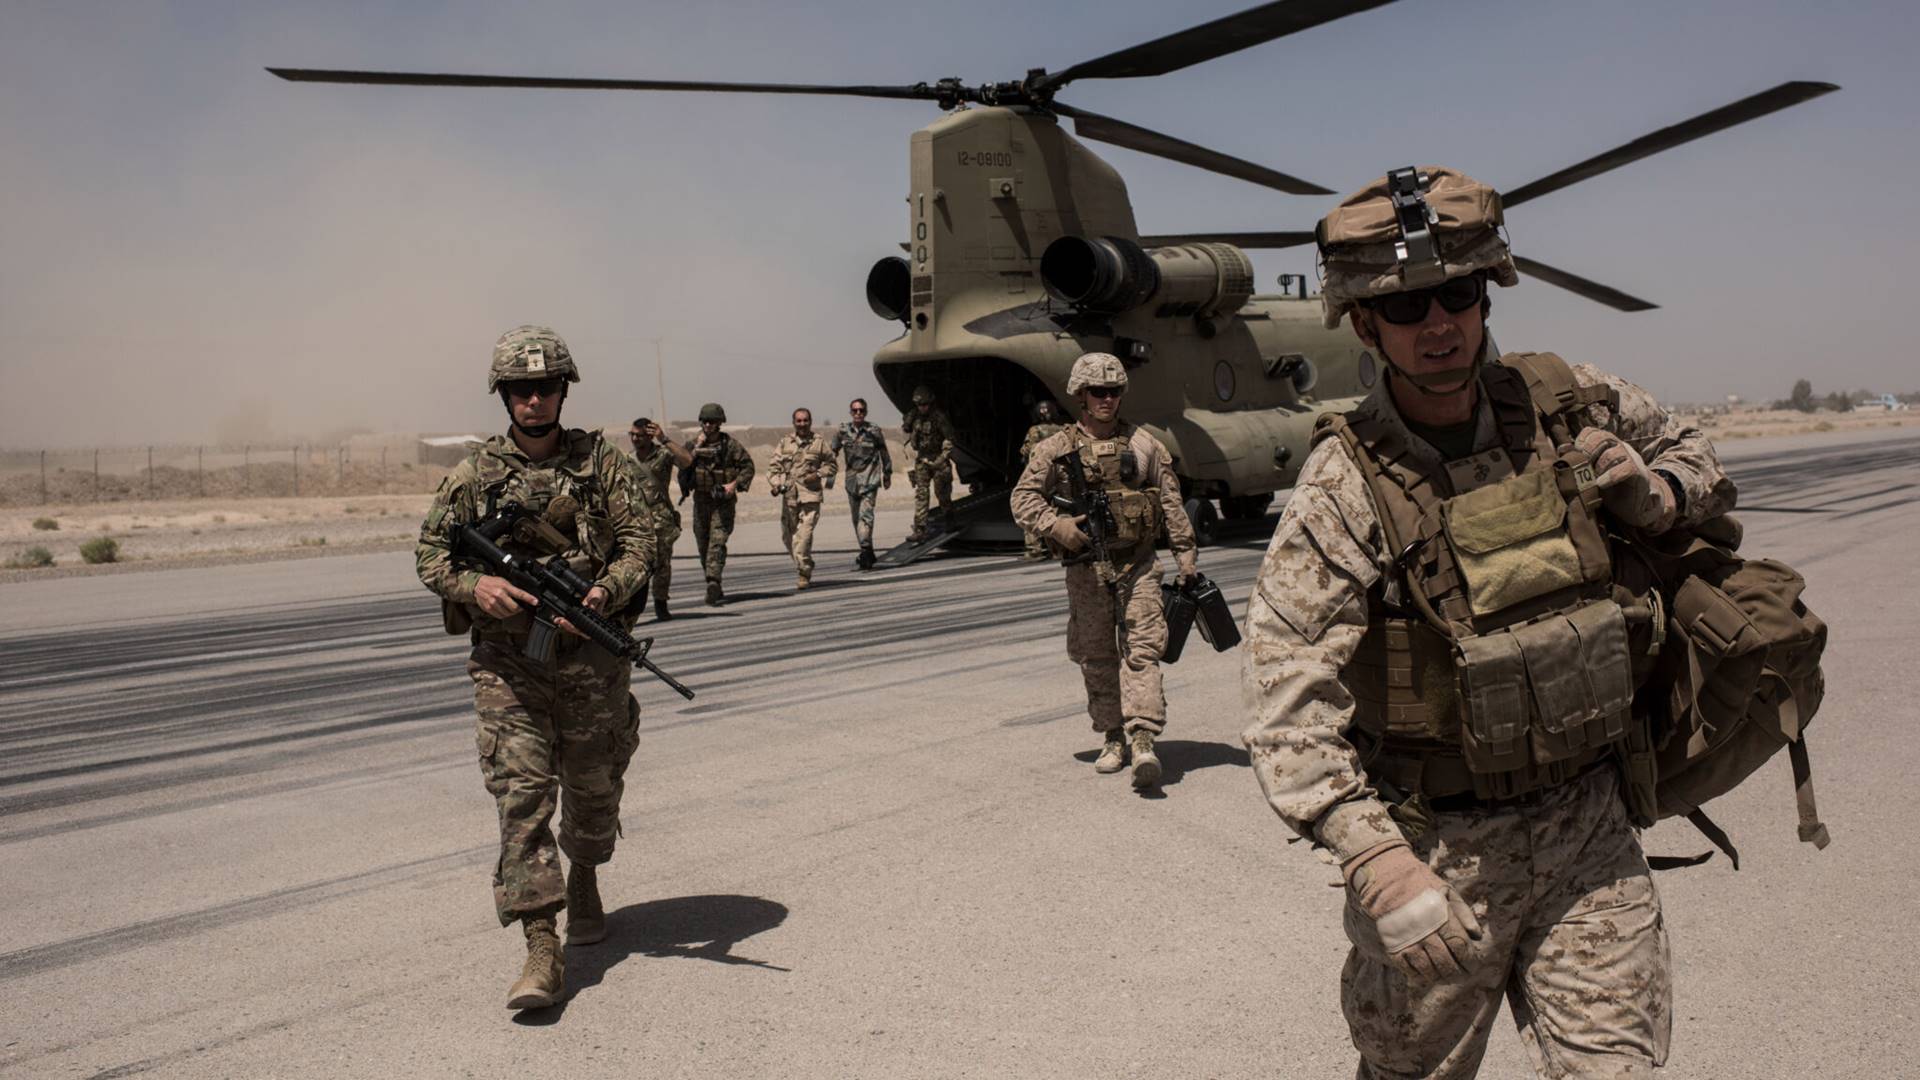 Goodbye Afghanistan – After Nearly 20 Years, Last US Troops Leave Kabul